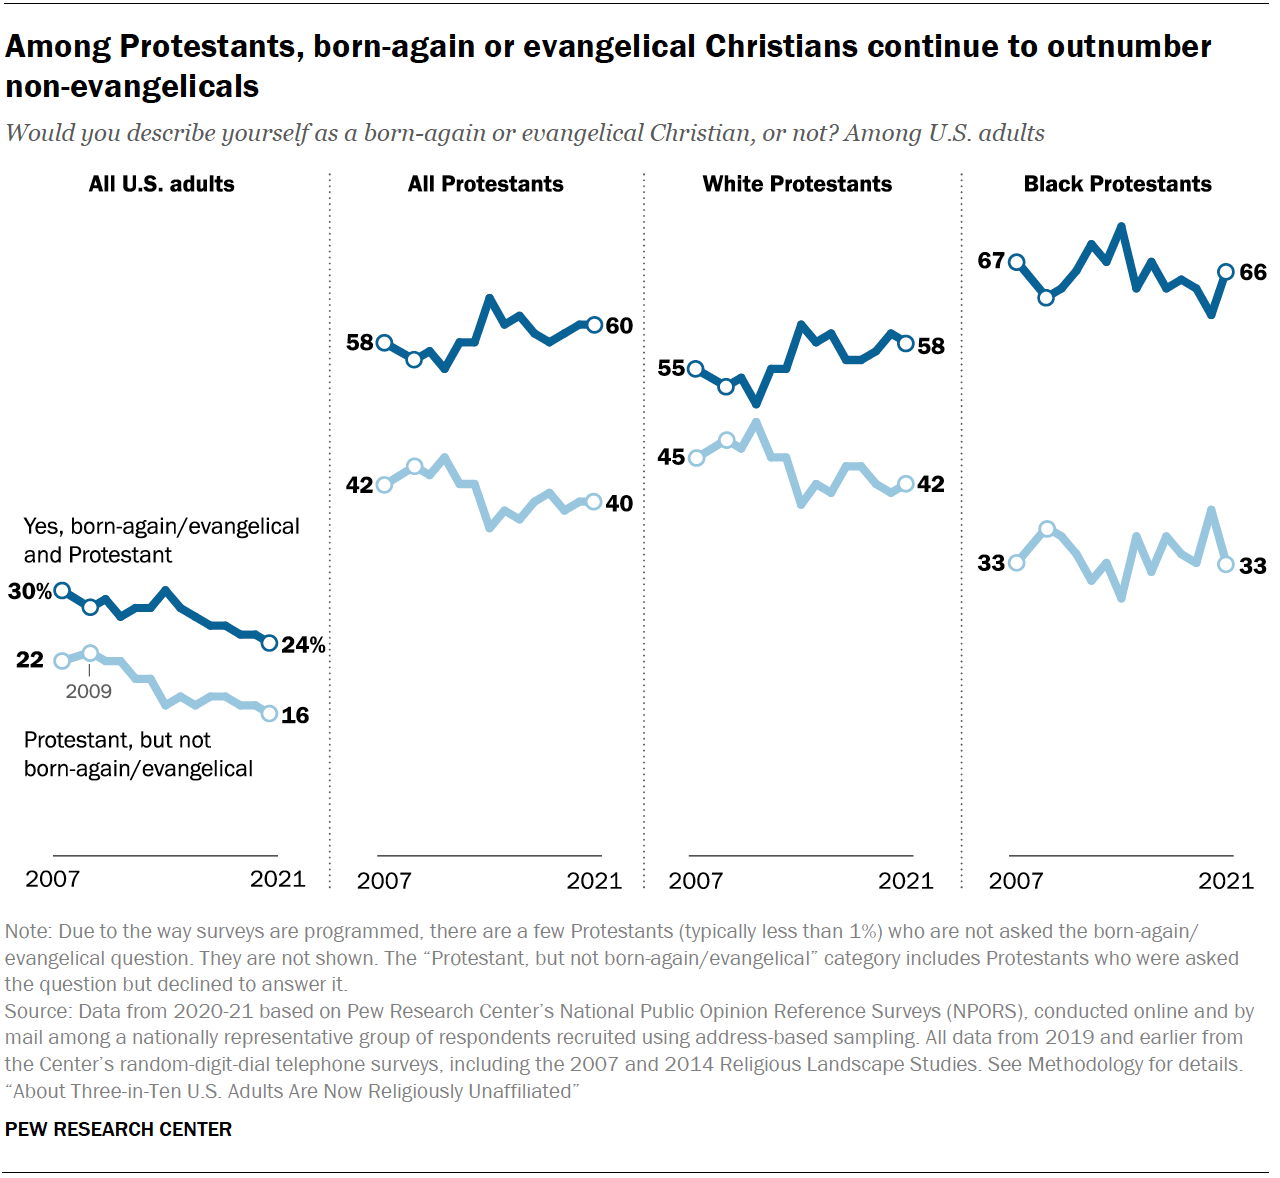 Among Protestants, born-again or evangelical Christians continue to outnumber non-evangelicals